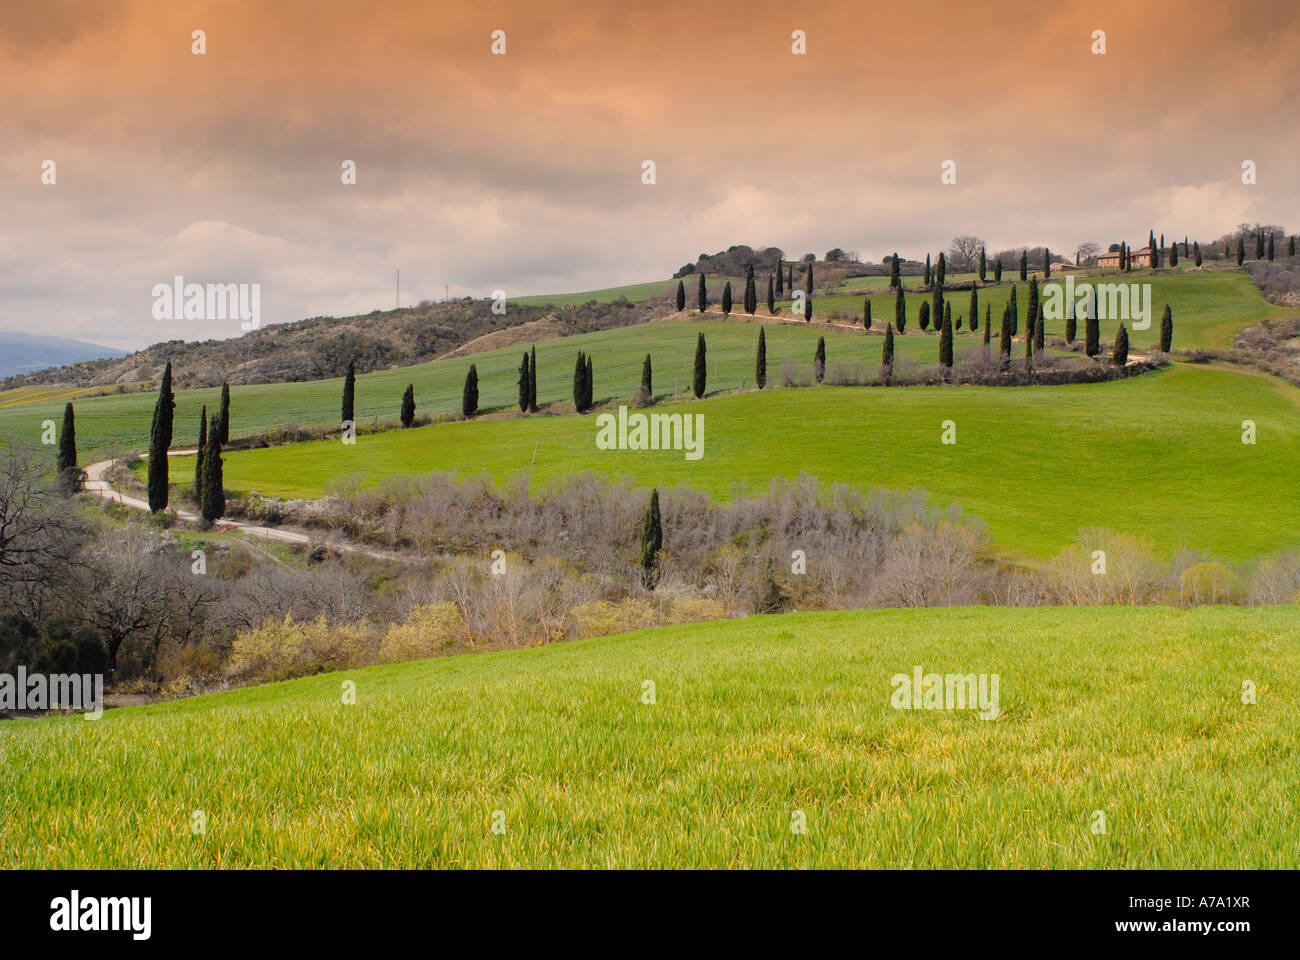 A road of cypress trees in a grassland locality La Foce Tuscany Italy Stock Photo